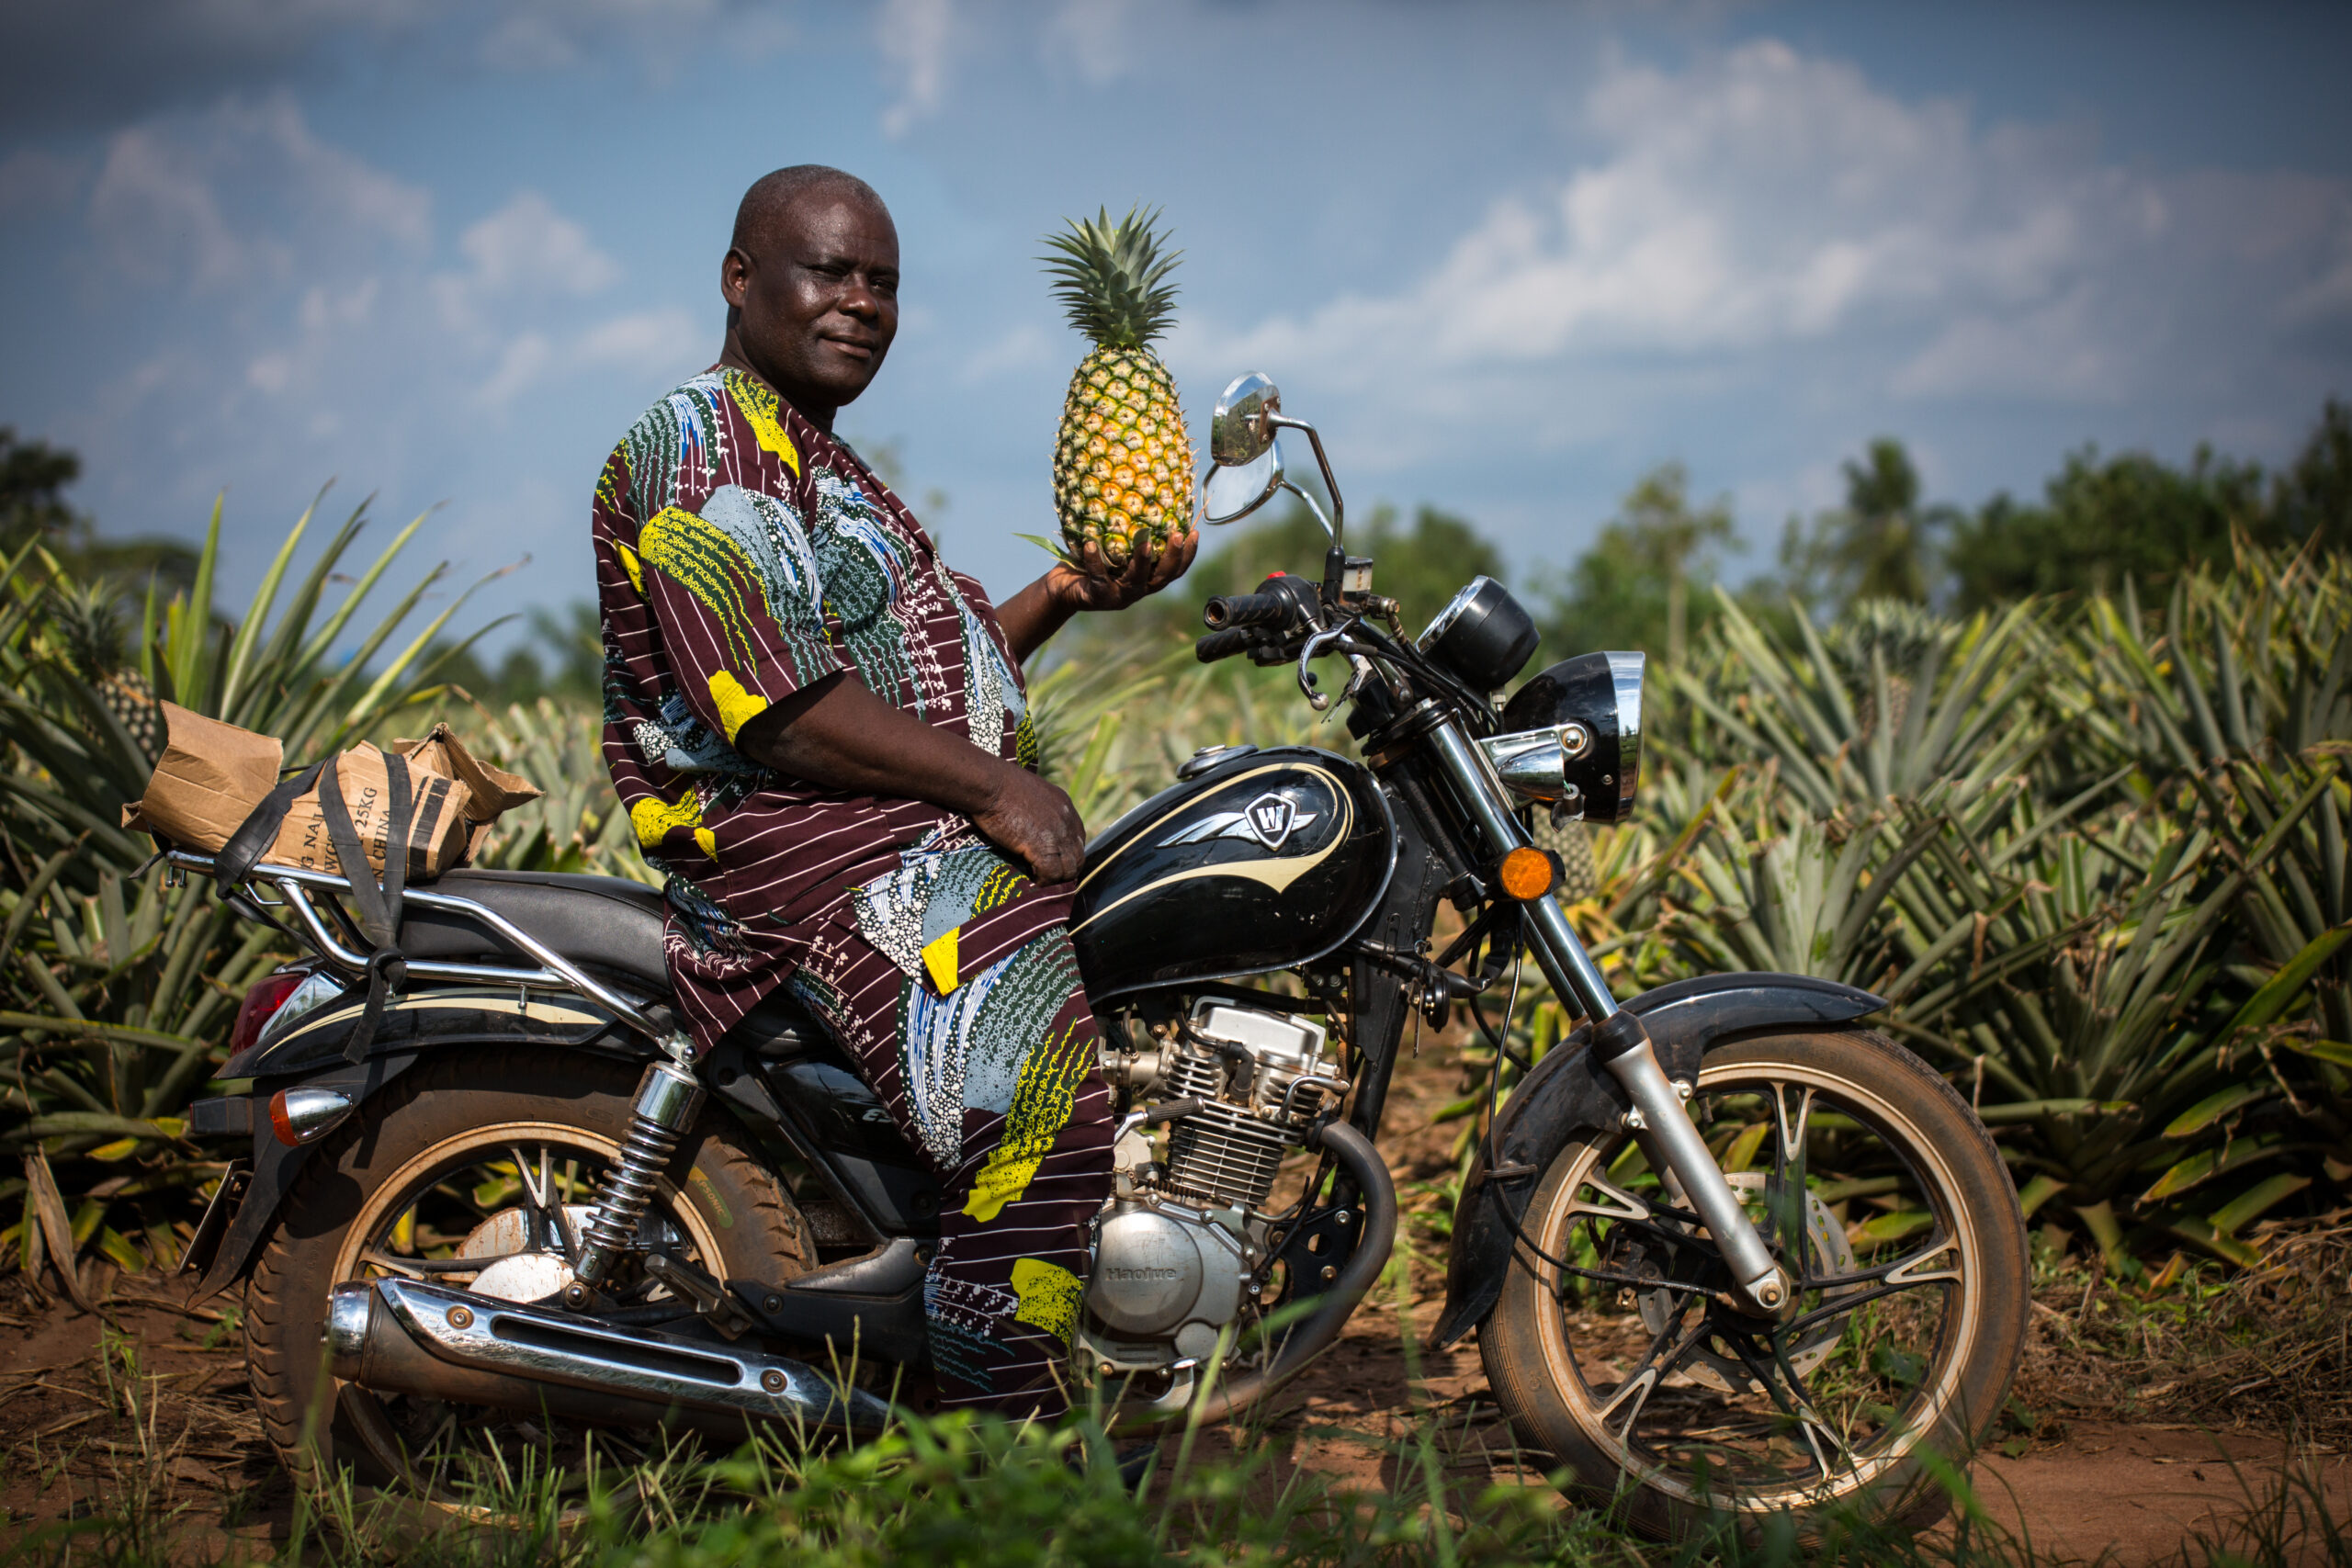 Man on a motorcycle holding a pineapple in a pineapple field in Benin.